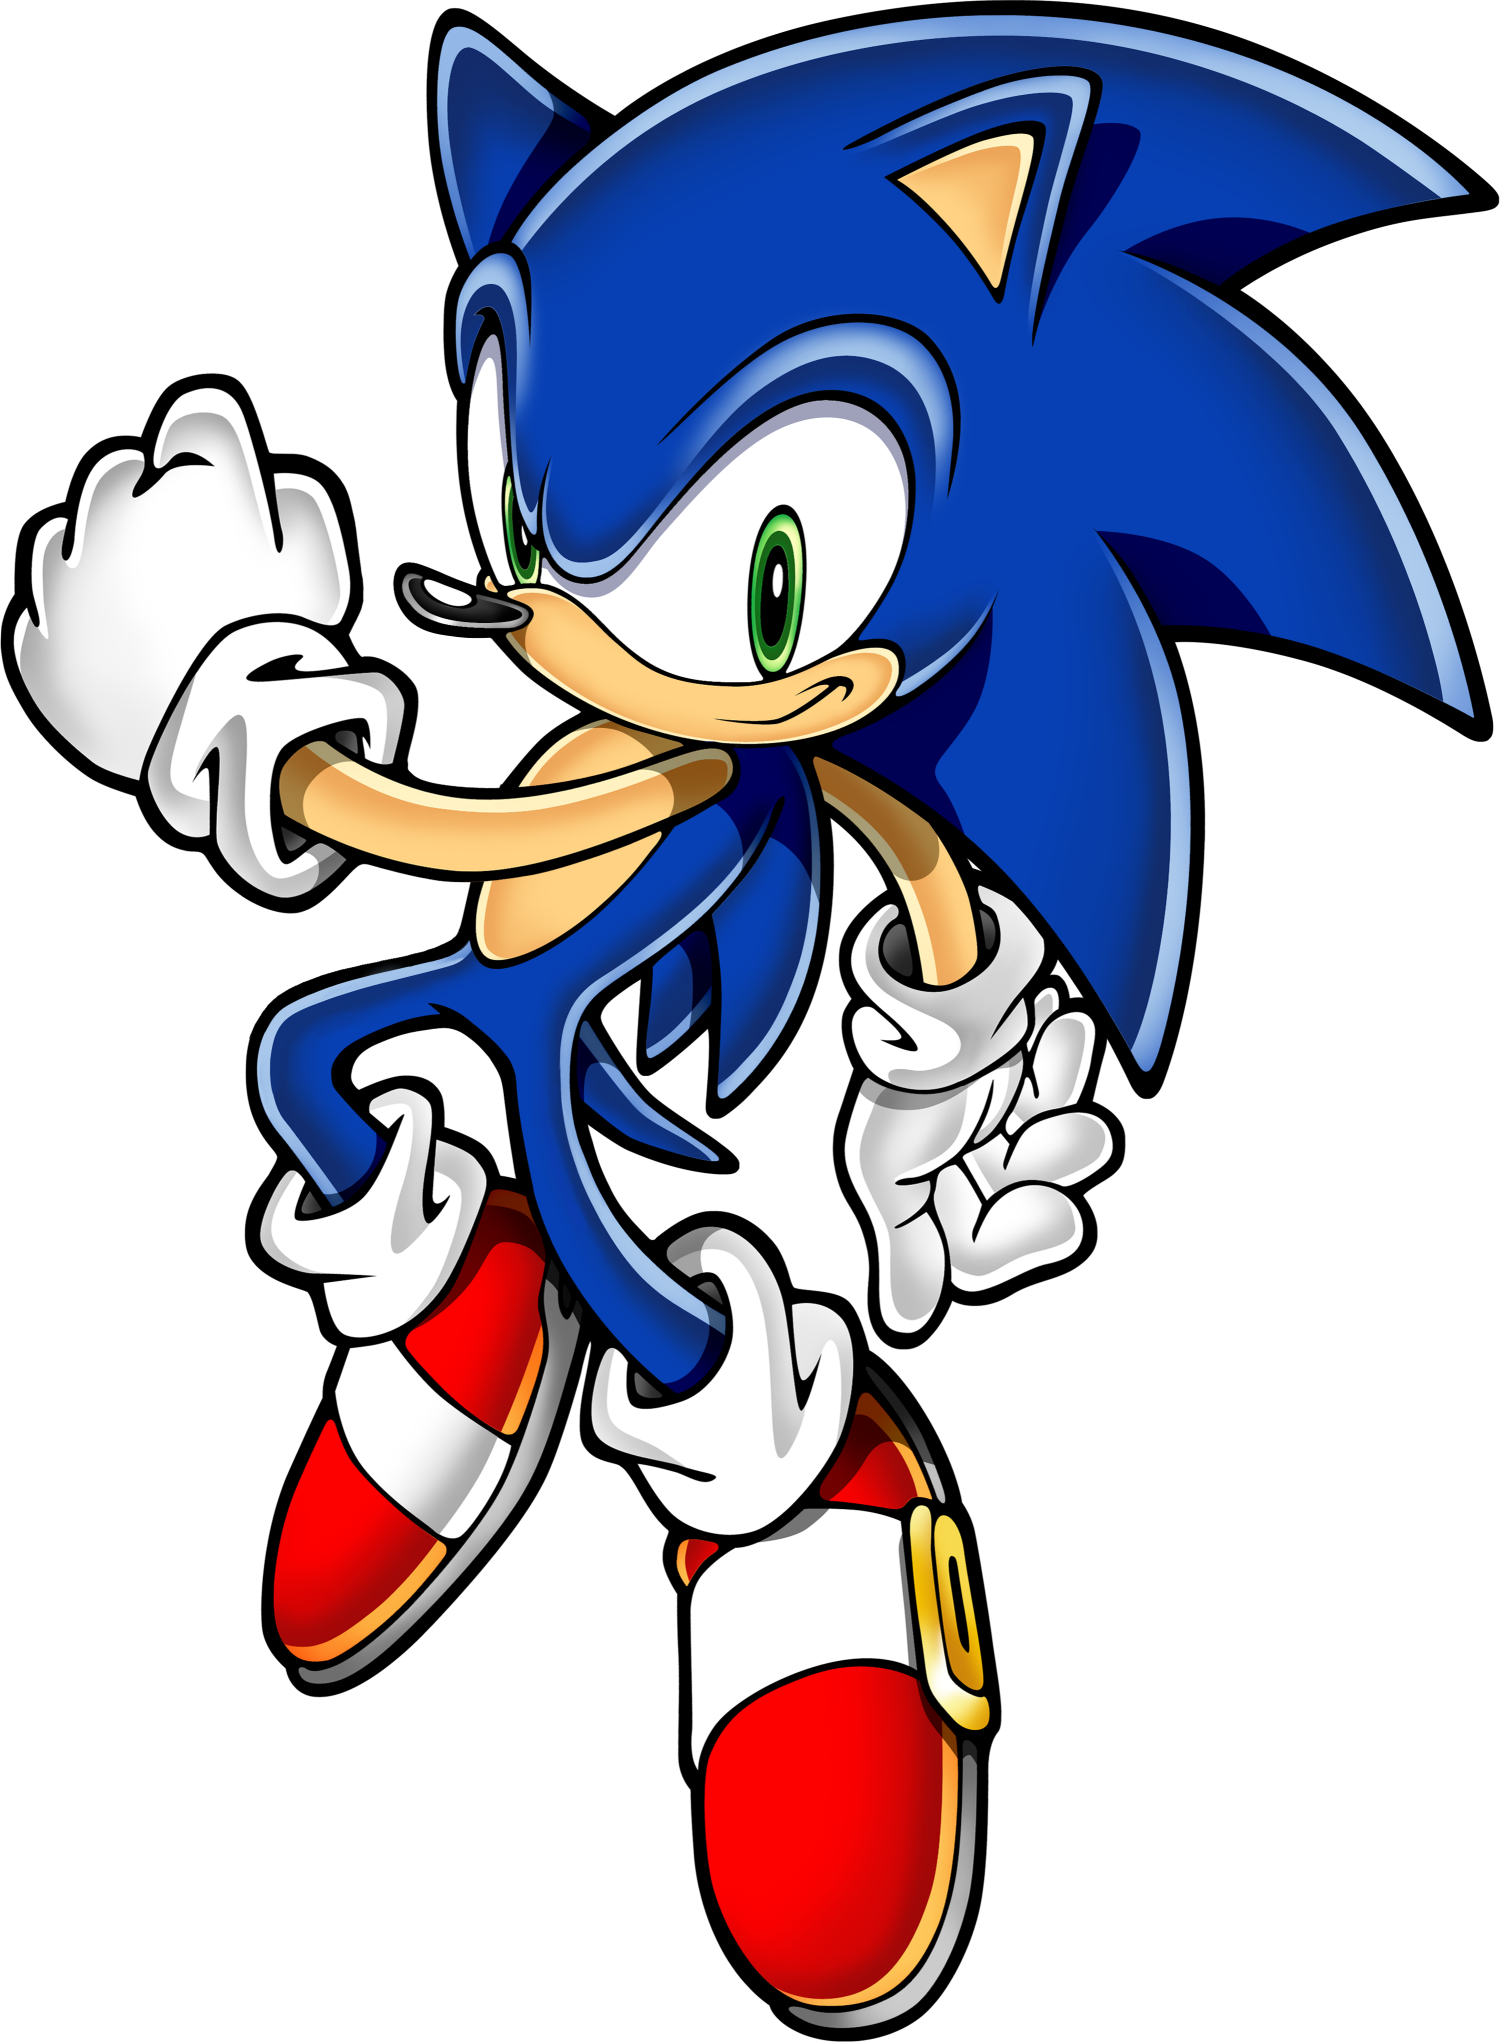 sonic frontiers png